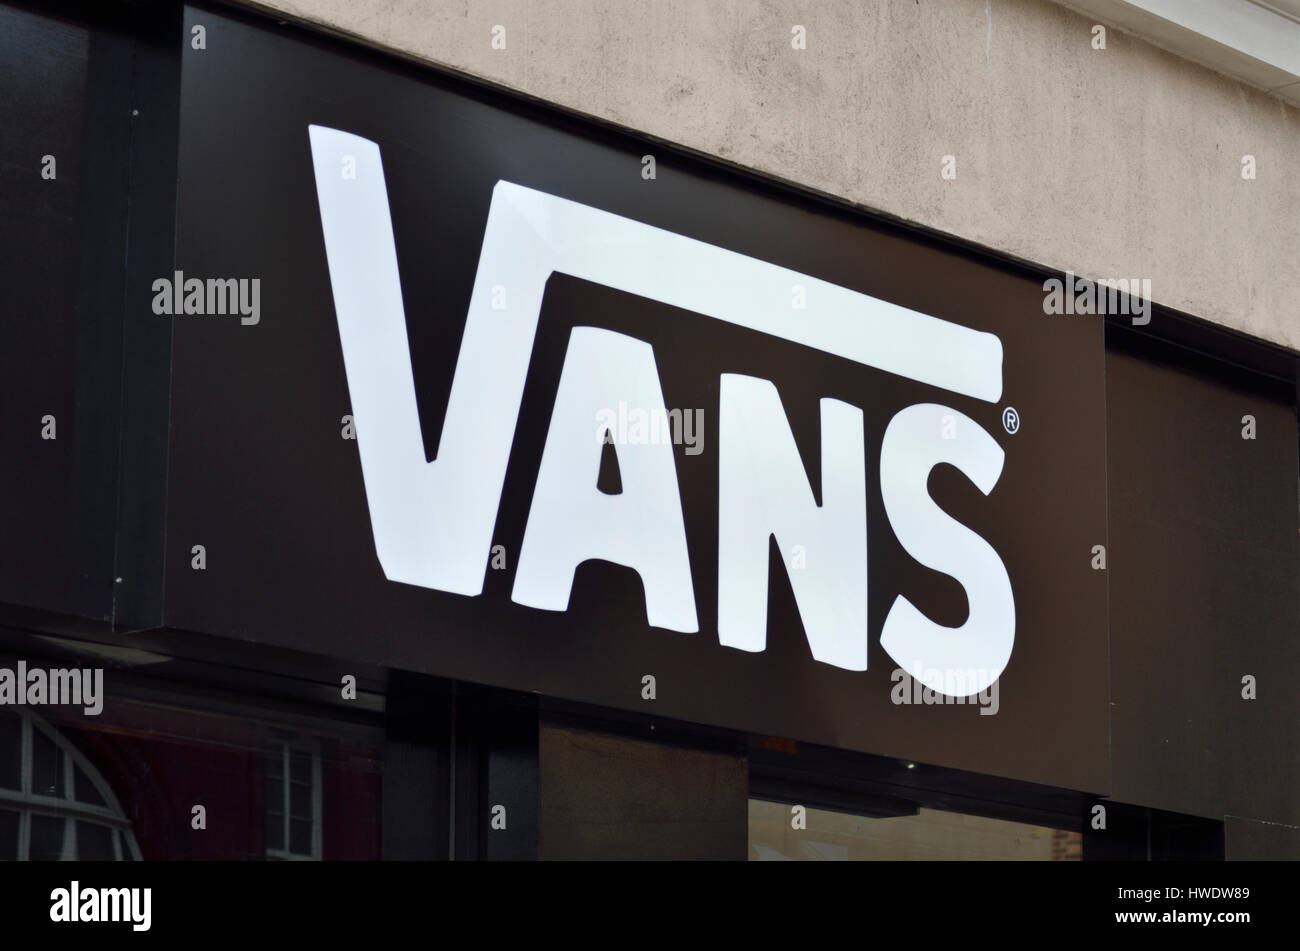 Vans Shop High Resolution Stock Photography and Images - Alamy